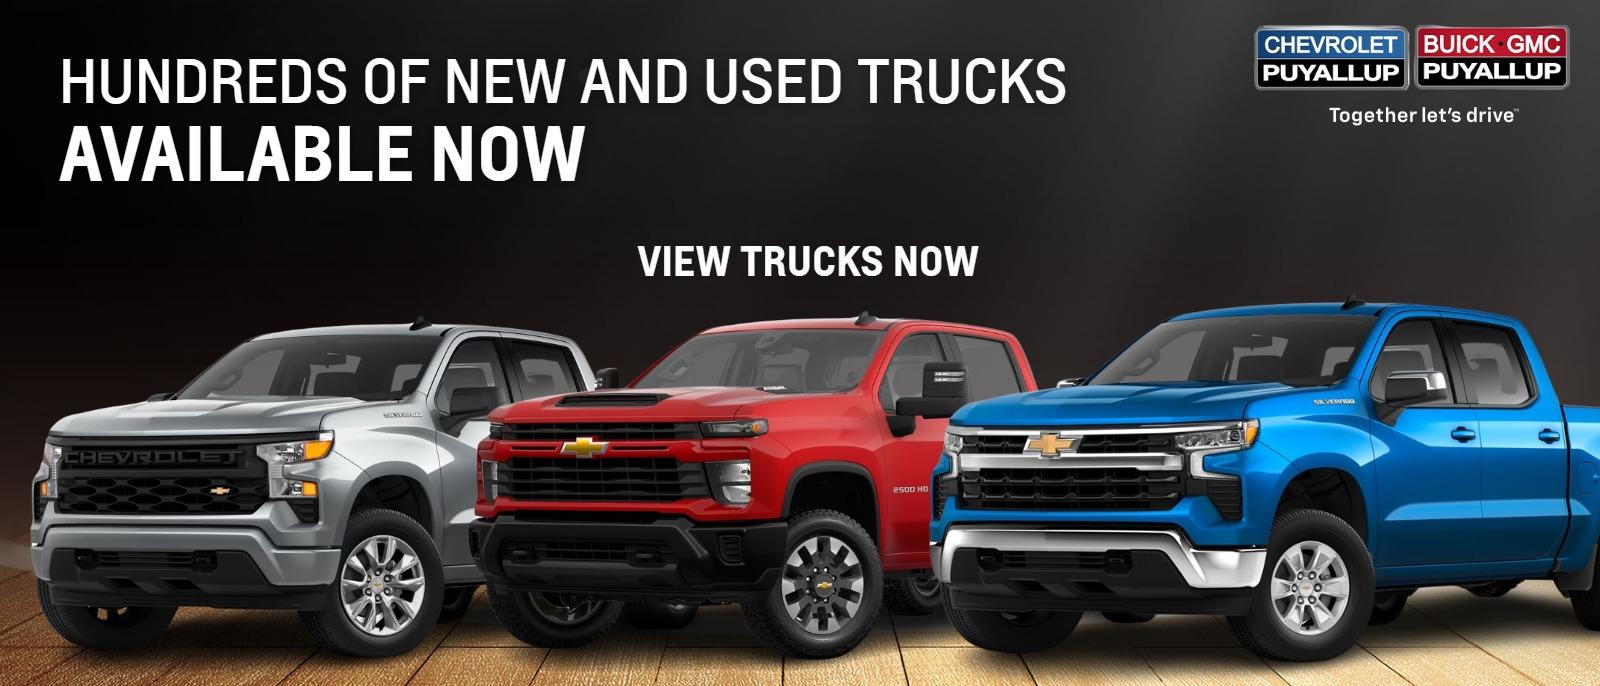 HUNDREDS OF NEW AND USED TRUCKS AVAILABLE NOW VIEW TRUCKS NOW